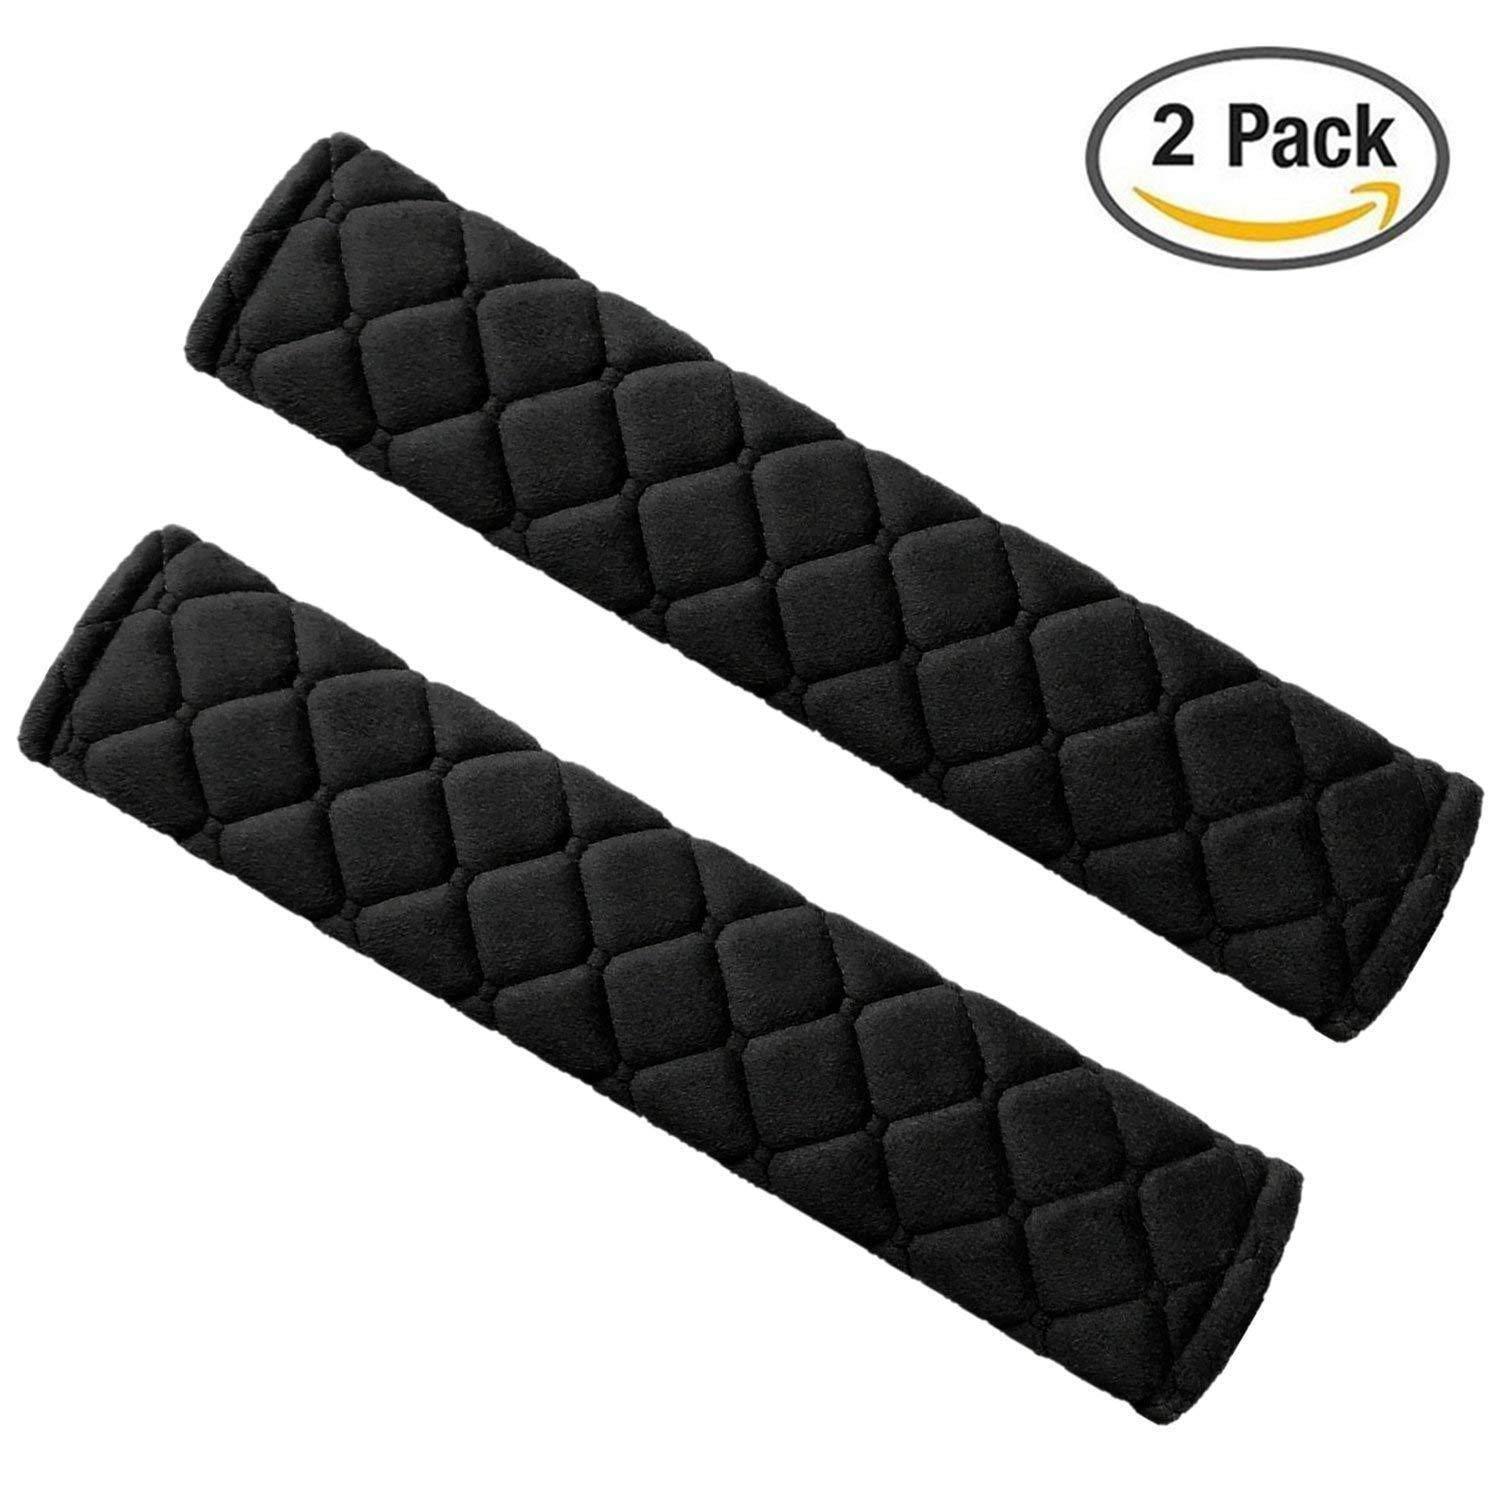 2 Pack Seat Belt Cover Pads for Car or Airplane Black Comfortable Seatbelt Strap Cushions for Travel or Outdoor by Haoranjia